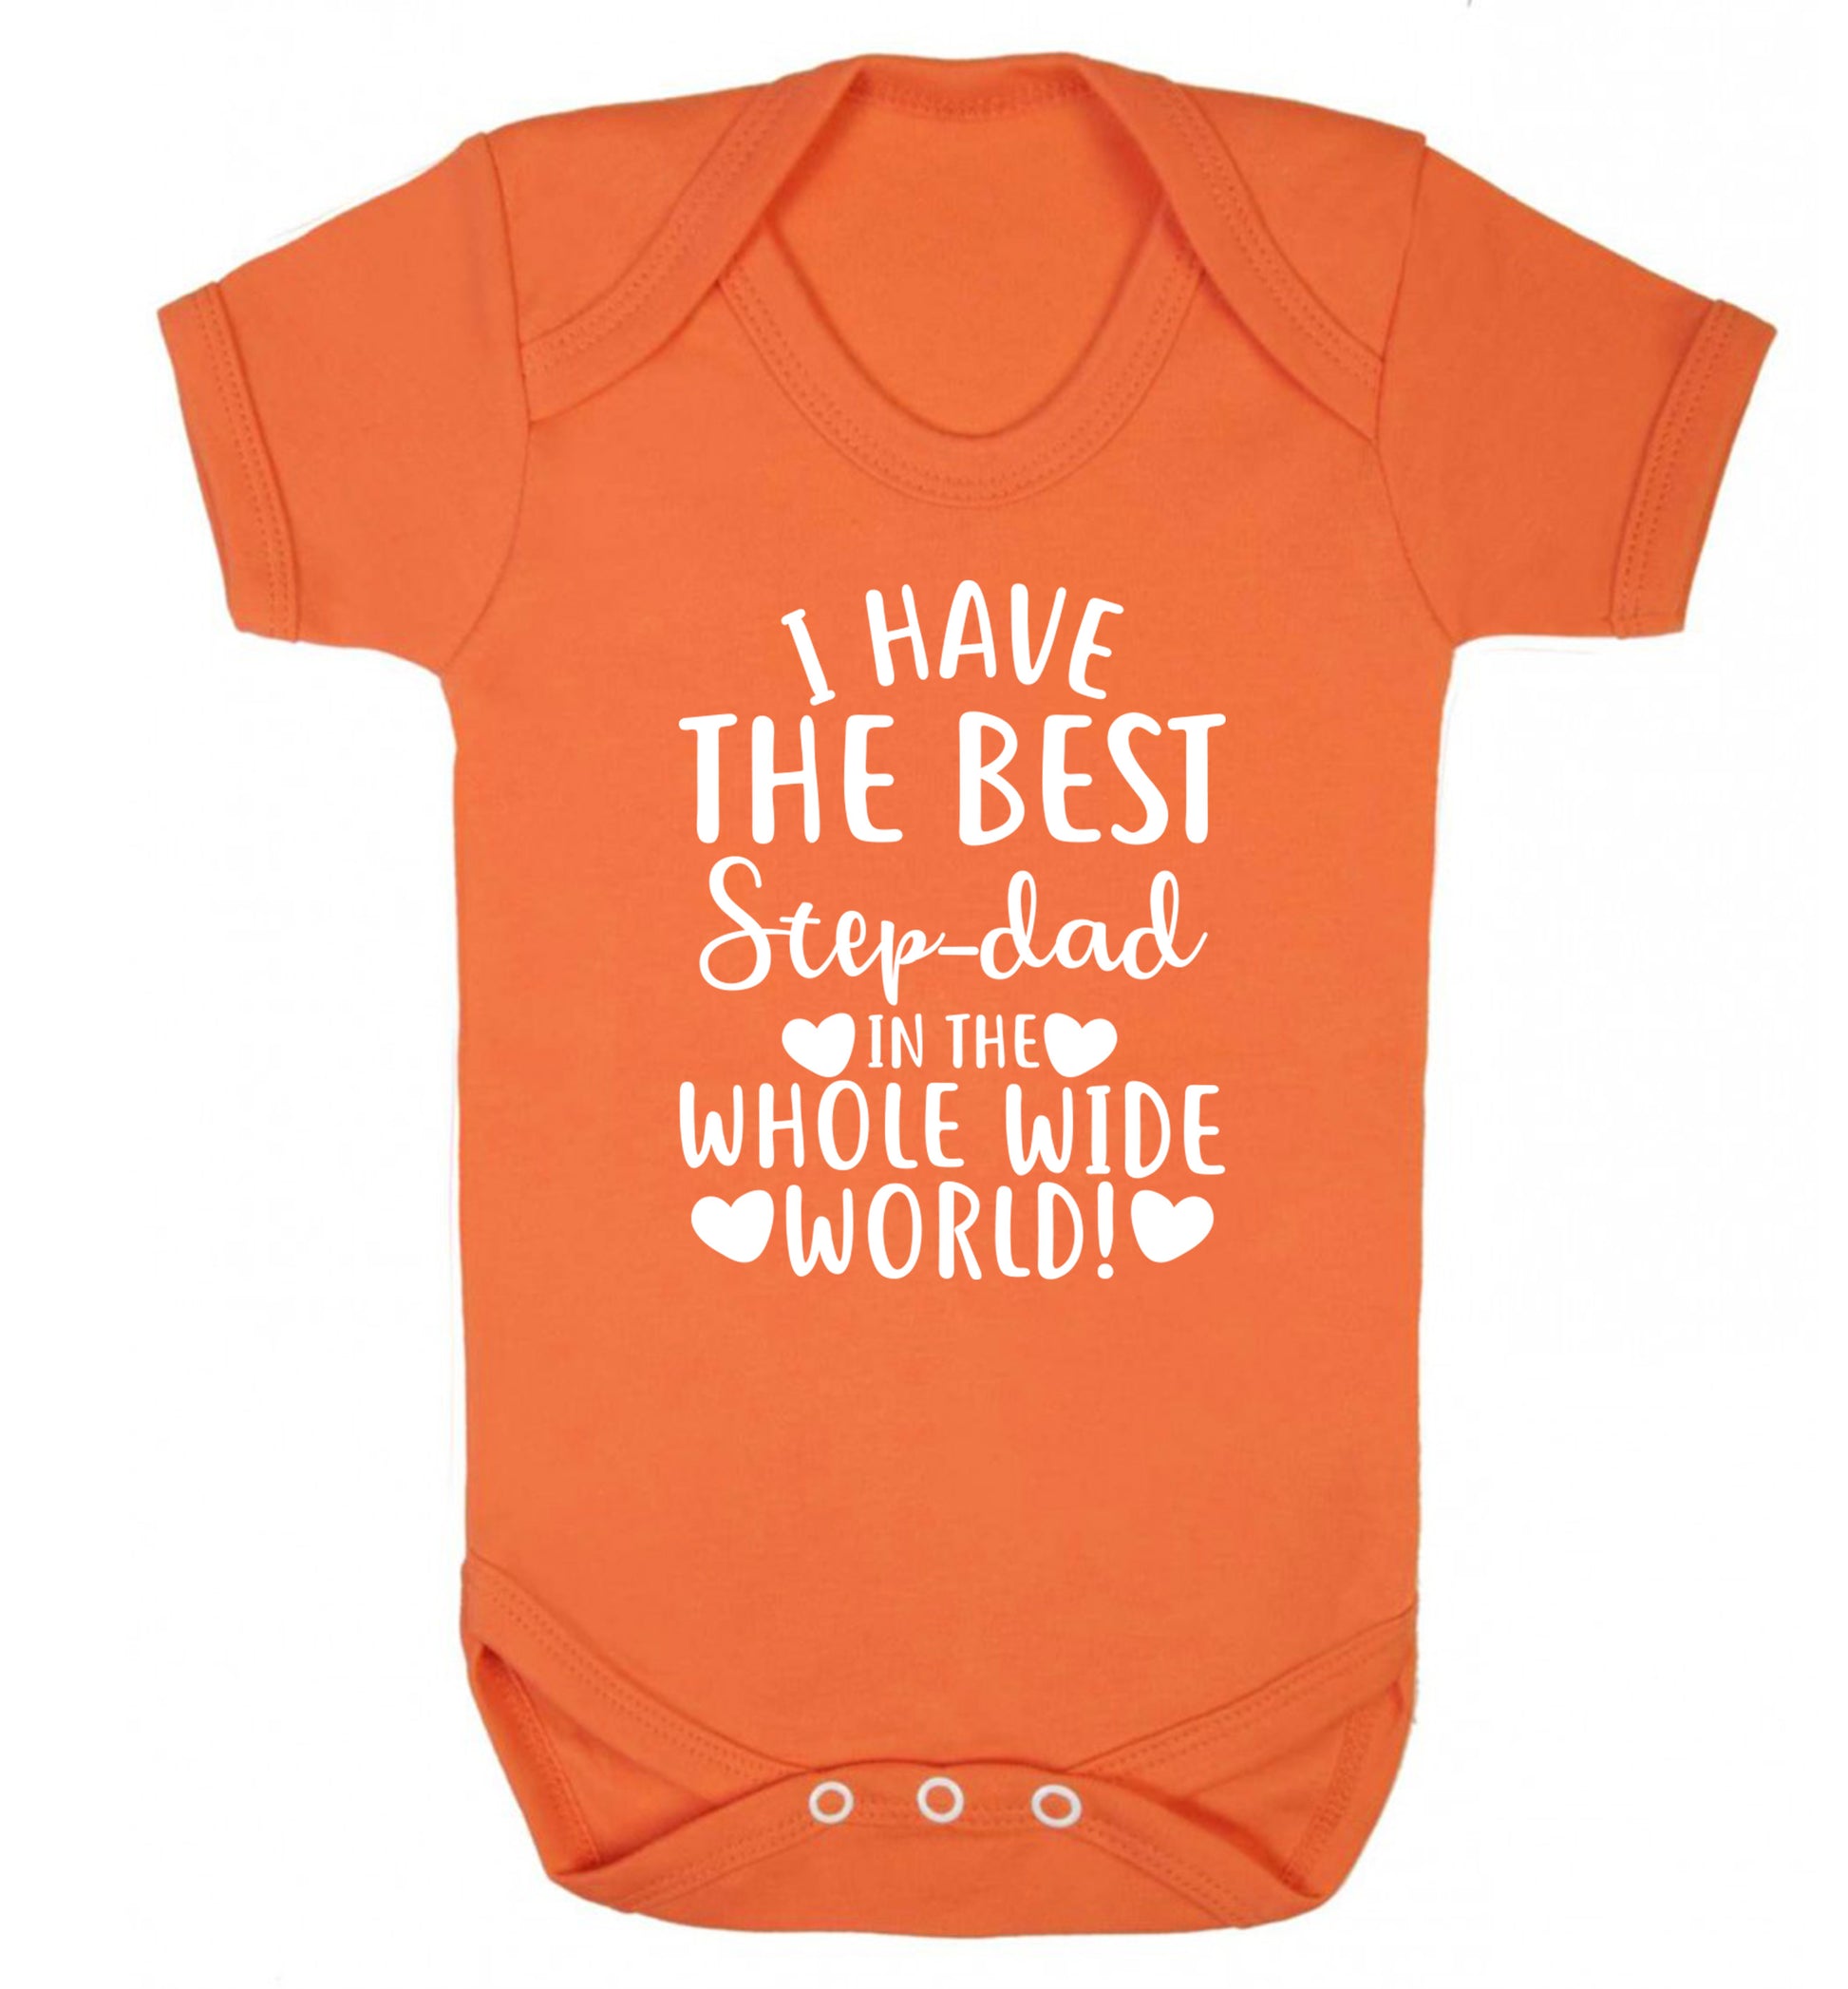 I have the best step-dad in the whole wide world! Baby Vest orange 18-24 months